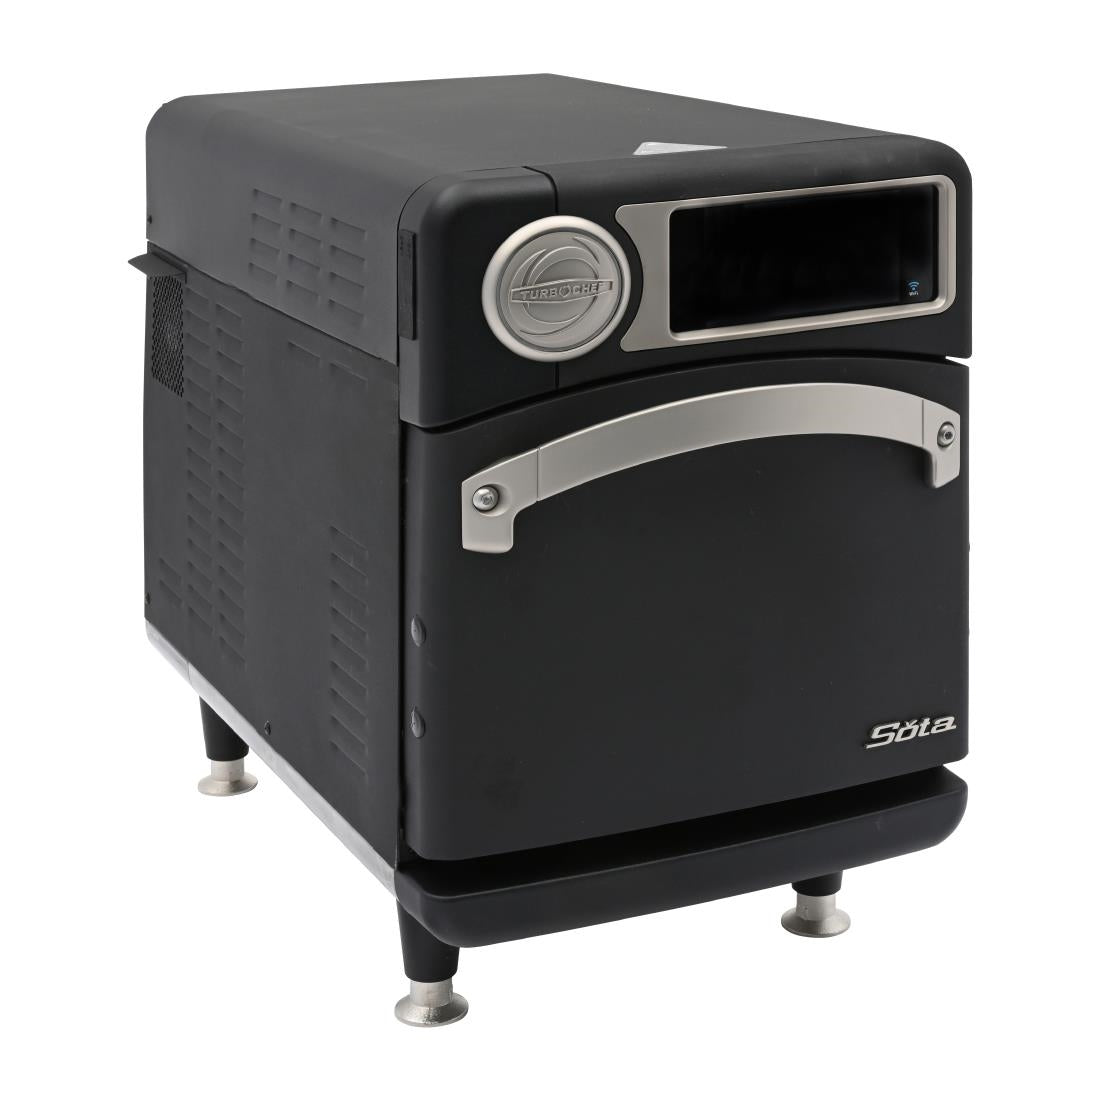 CH233 Turbochef Sota Touch Ventless Rapid Cook Oven JD Catering Equipment Solutions Ltd